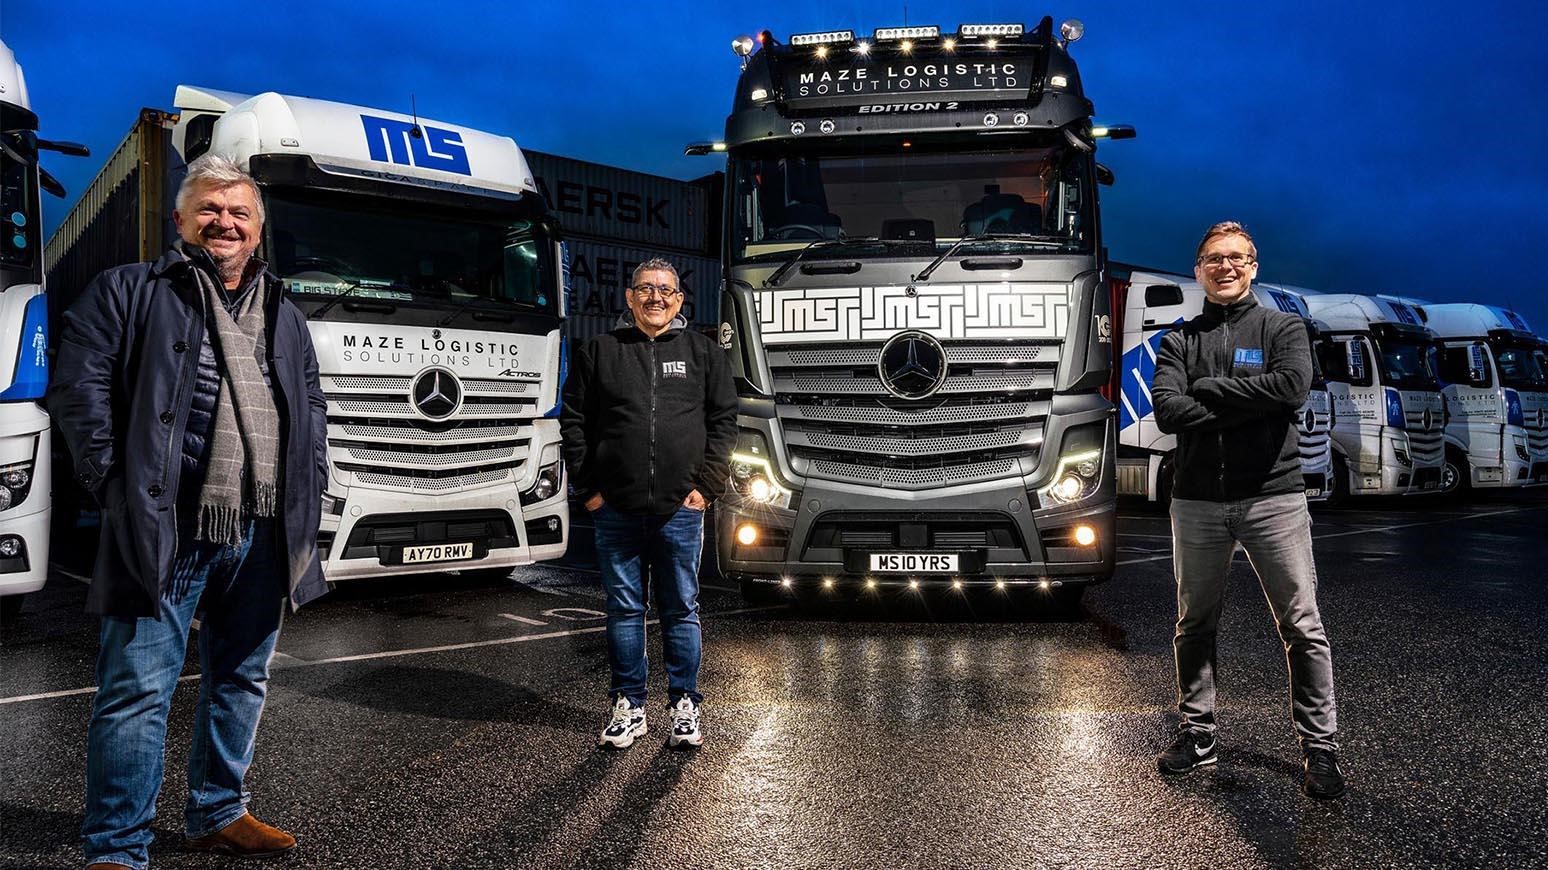 Ipswich-Based Maze Logistic Solutions Rings In 10th Anniversary With New Mercedes-Benz Actros Edition 2